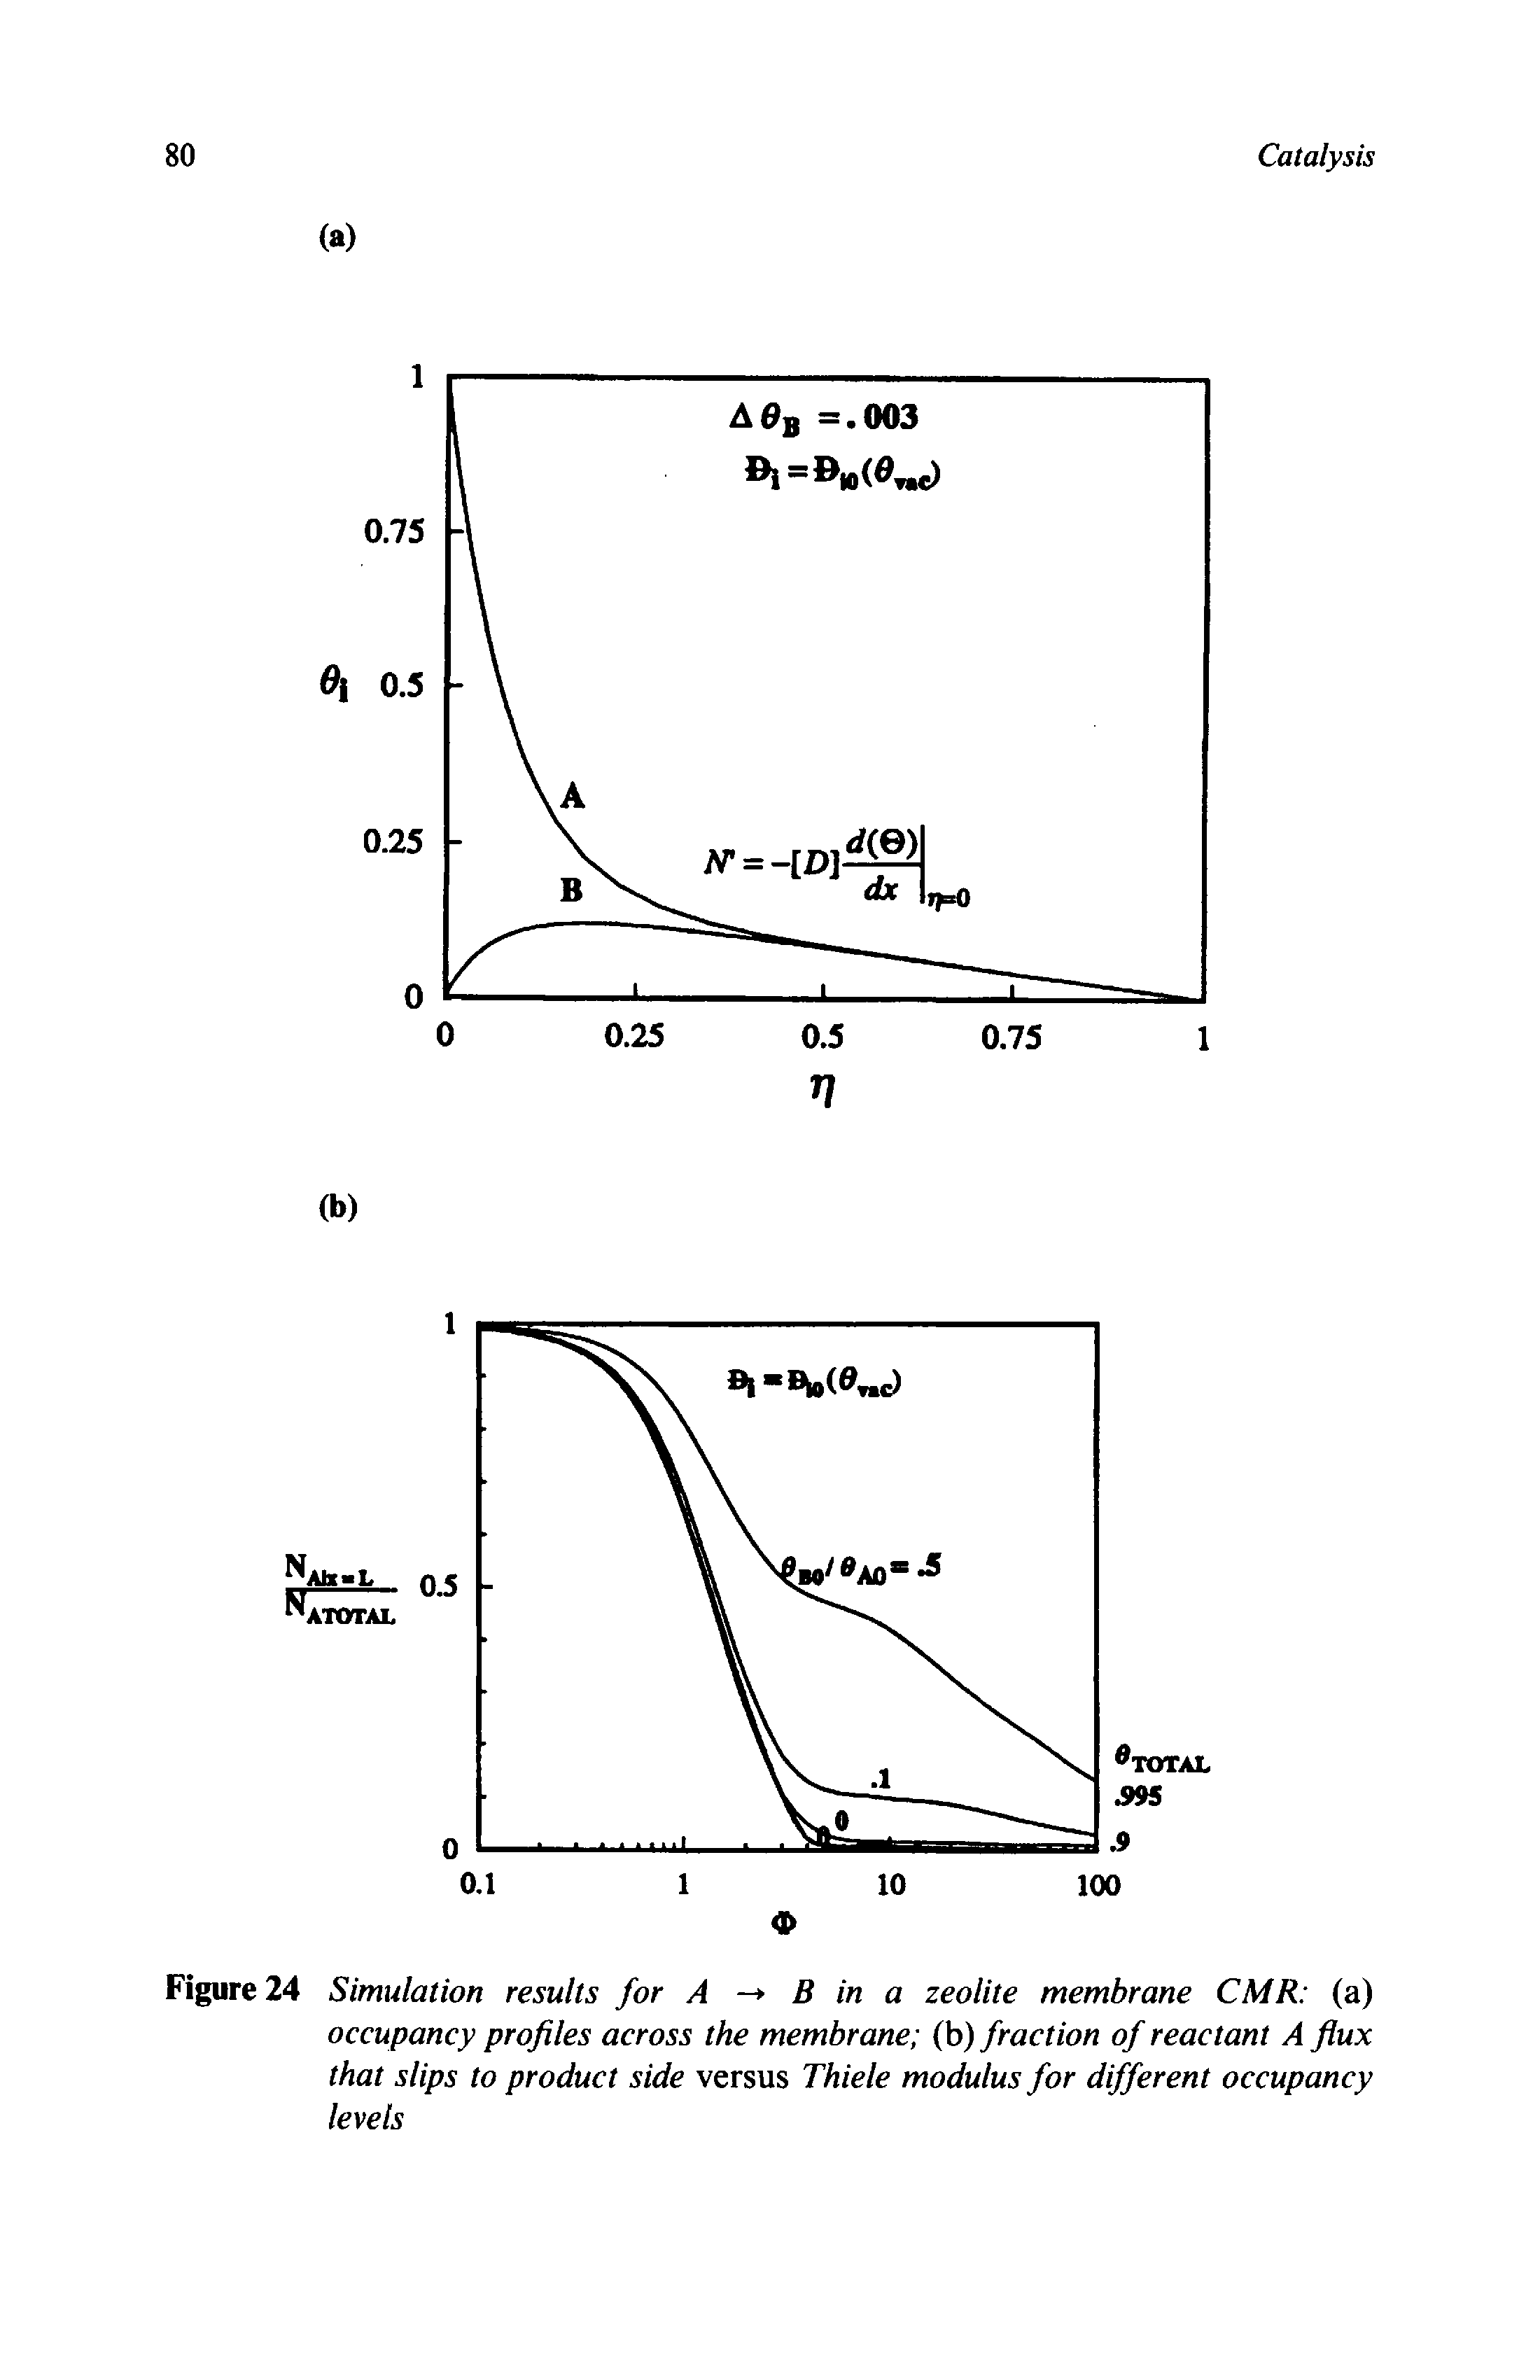 Figure 24 Simulation results for A B in a zeolite membrane CMR (a) occupancy profiles across the membrane (b) fraction of reactant A flux that slips to product side versus Thiele modulus for different occupancy levels...